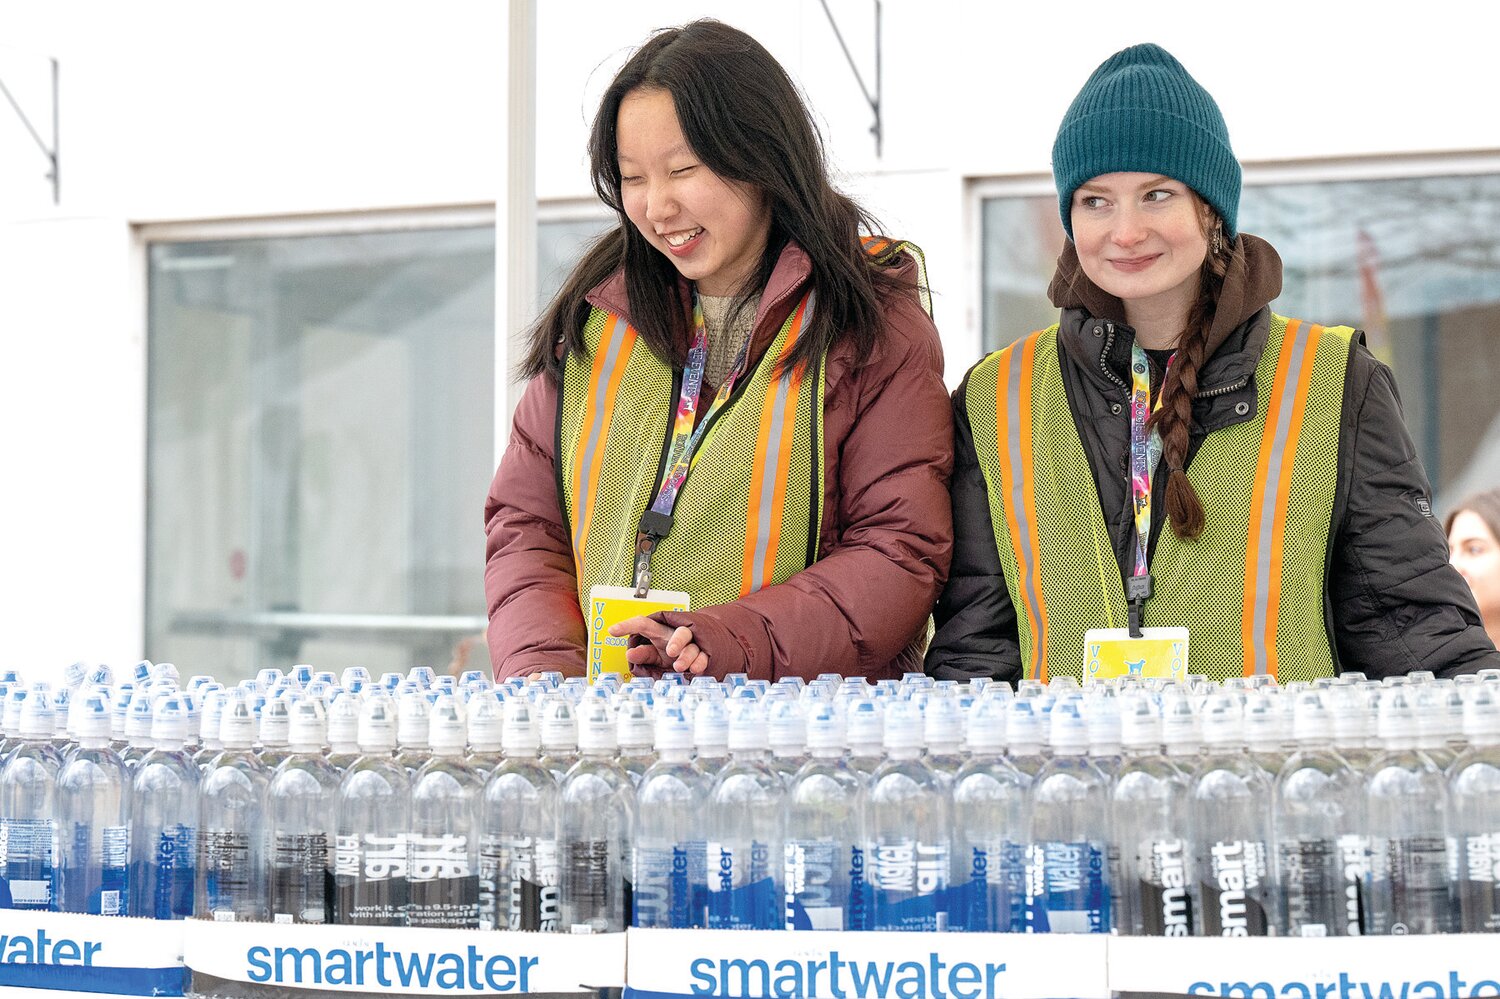 High school students from Central Bucks volunteer by handing out water to the racers following the Great Cupid Run, an event hosted by Scoogie Events.